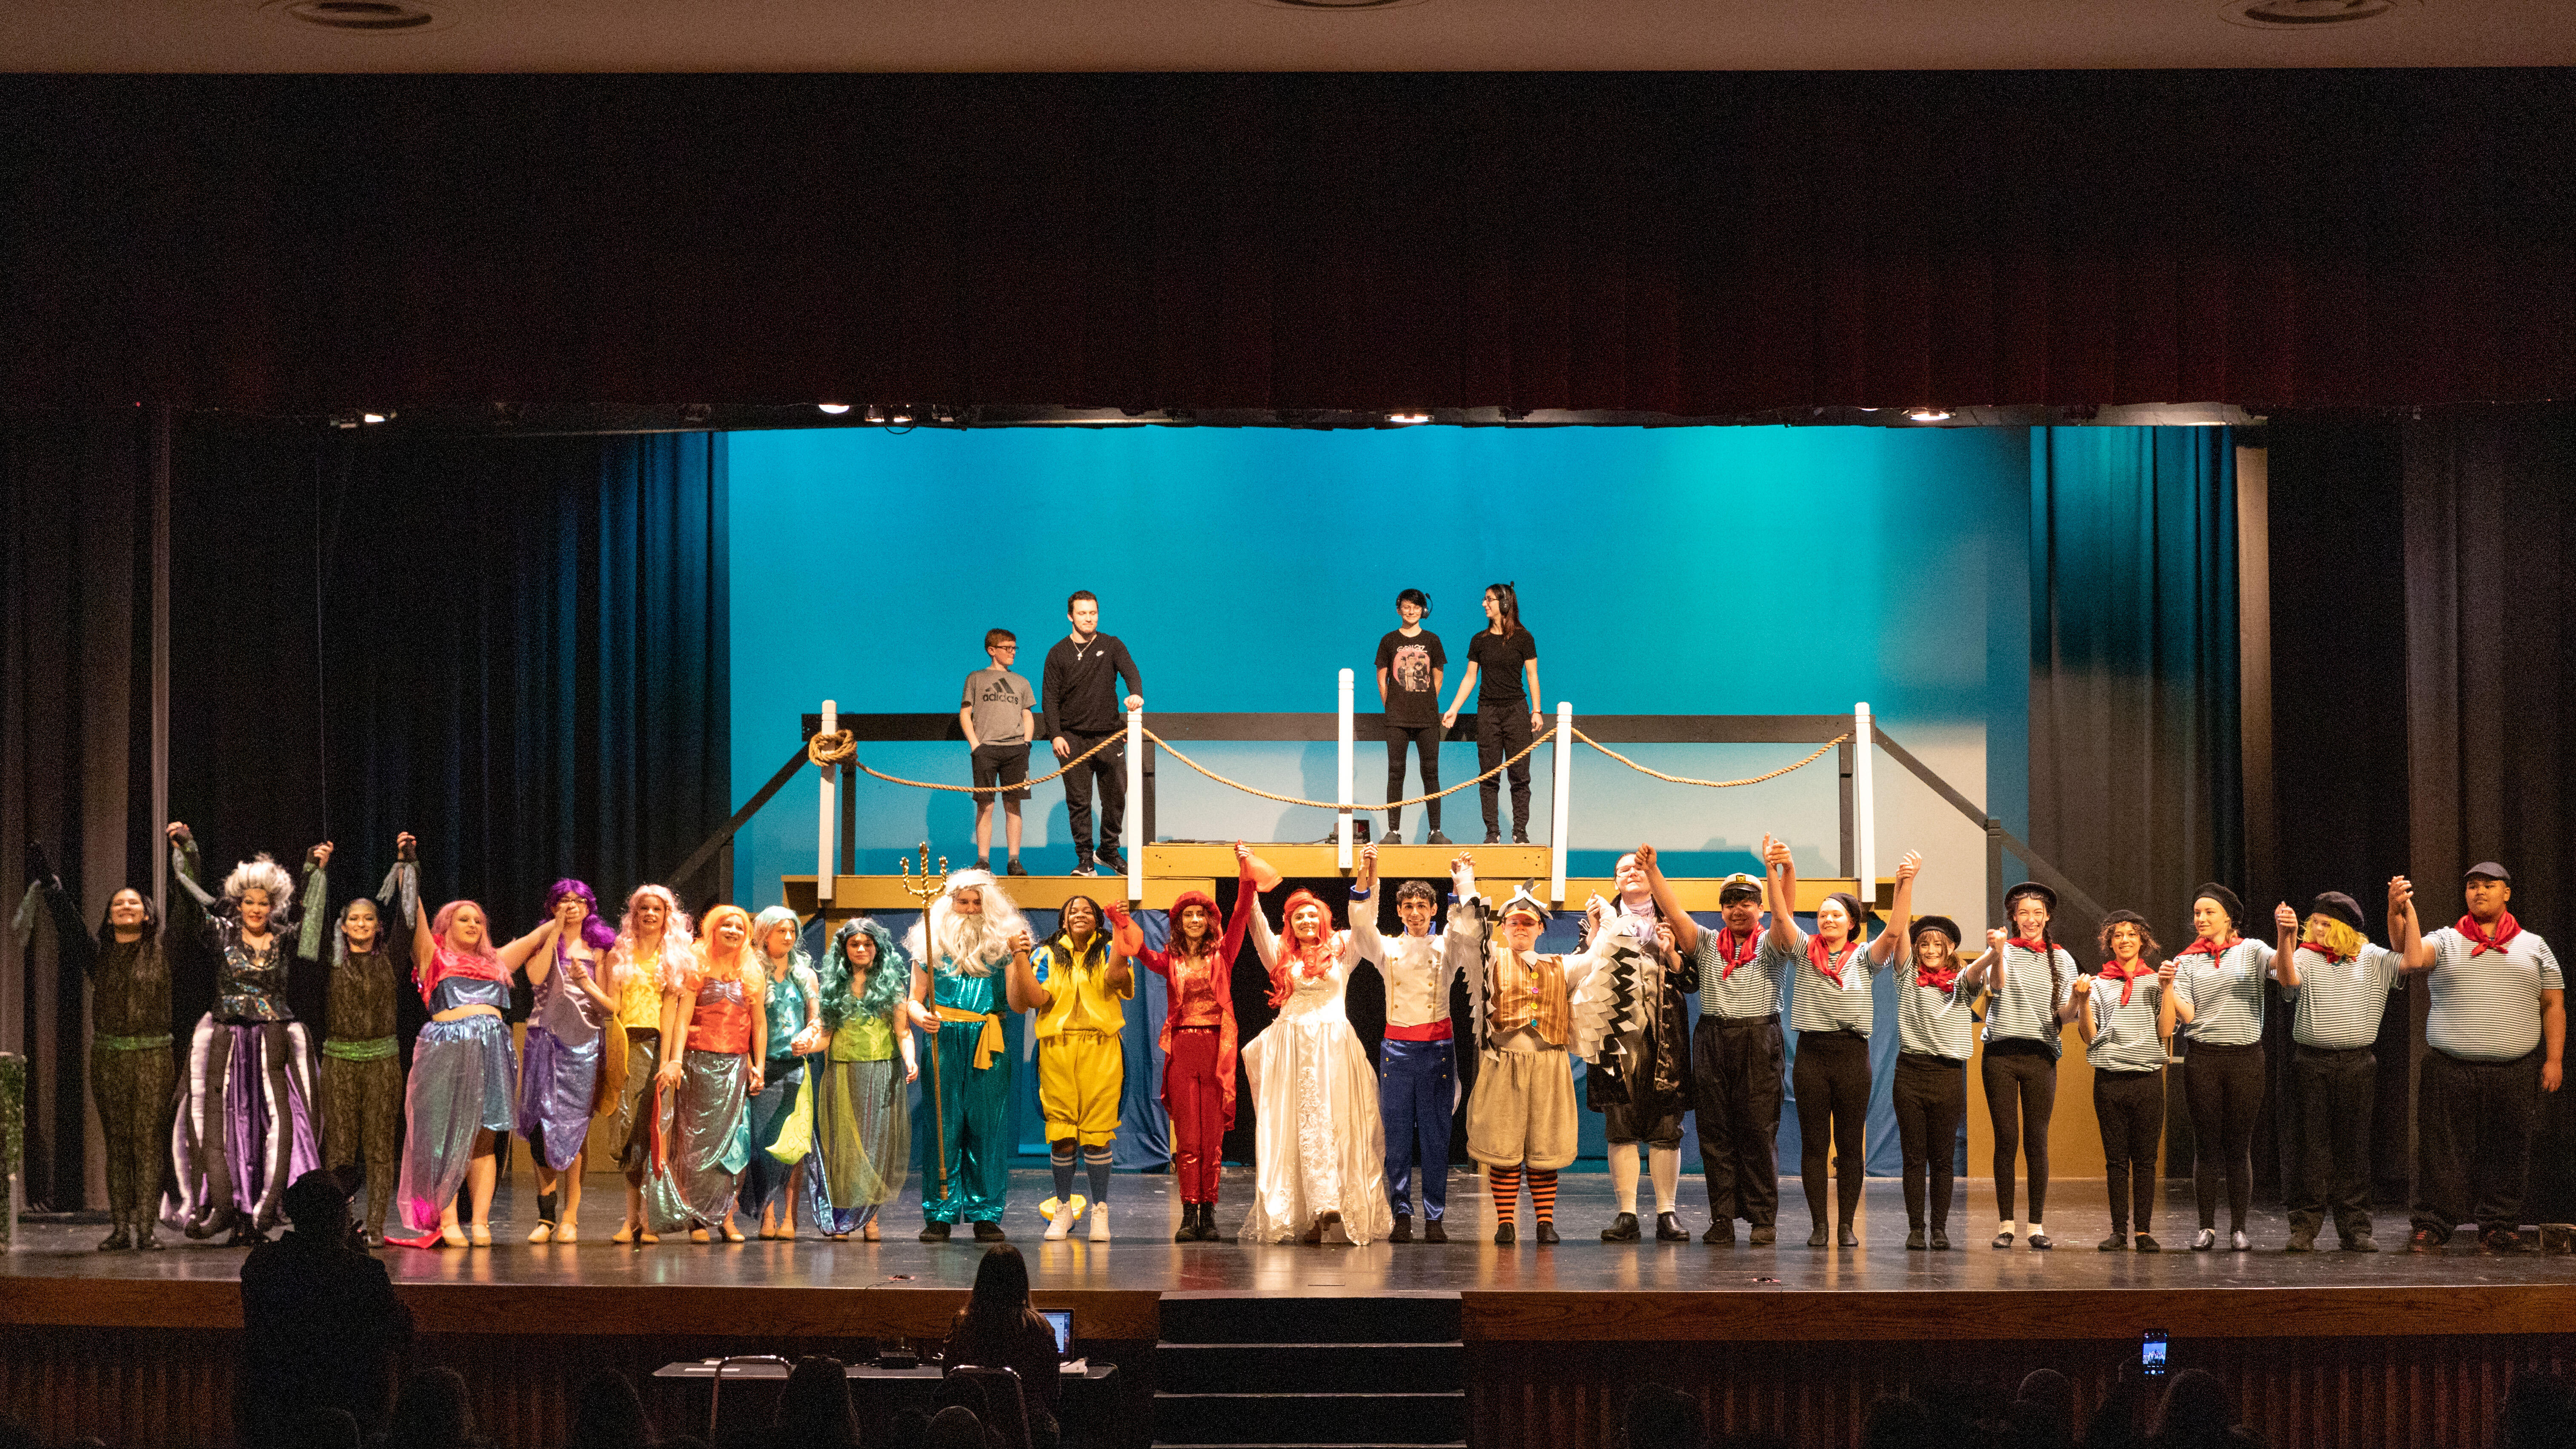 The cast and crew of The Little Mermaid